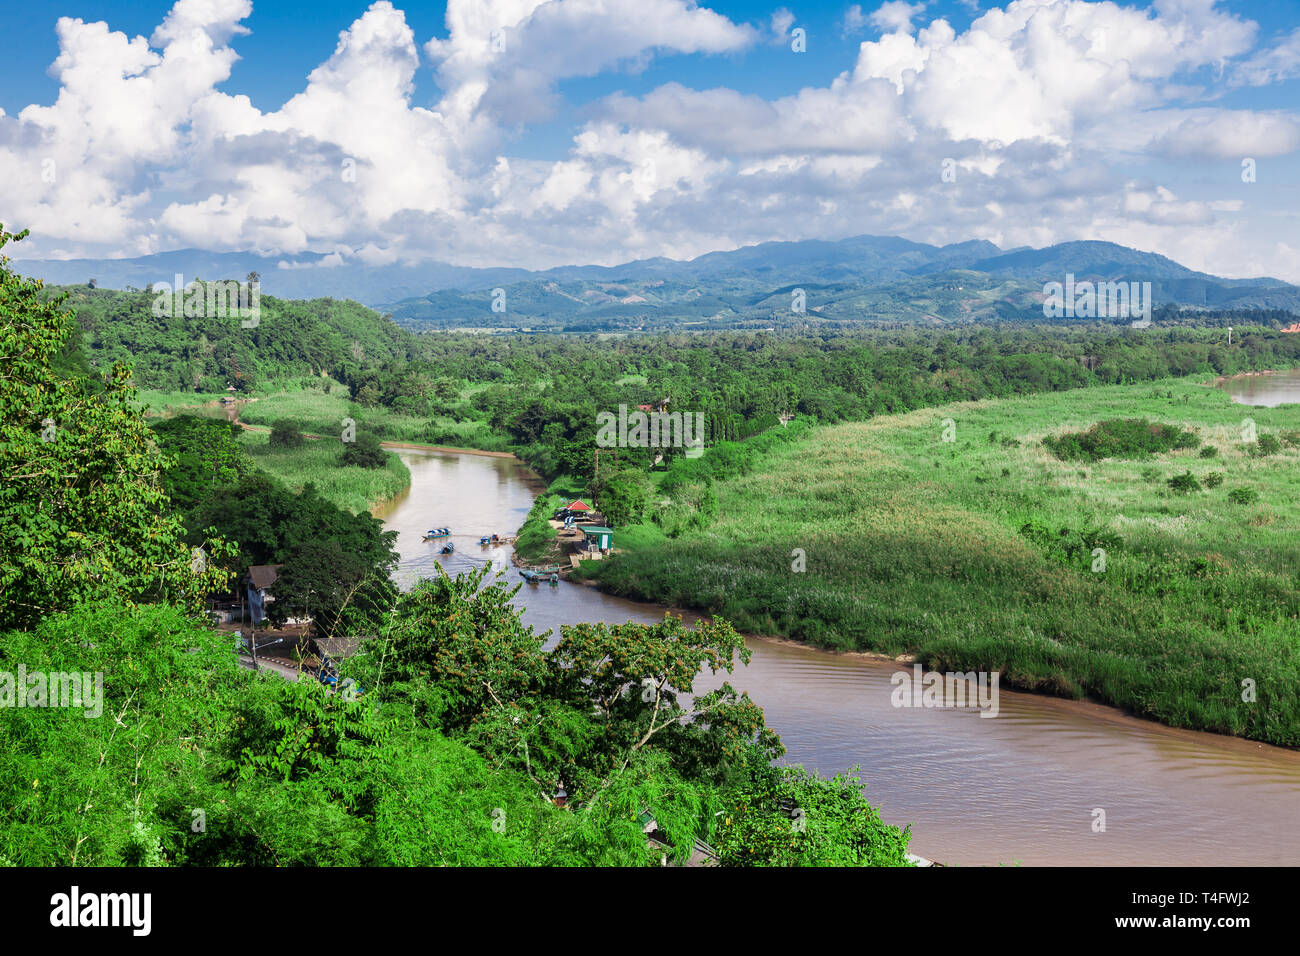 Golden Triangle at Mekong River, Chiang Rai Province, Thailand Stock Photo